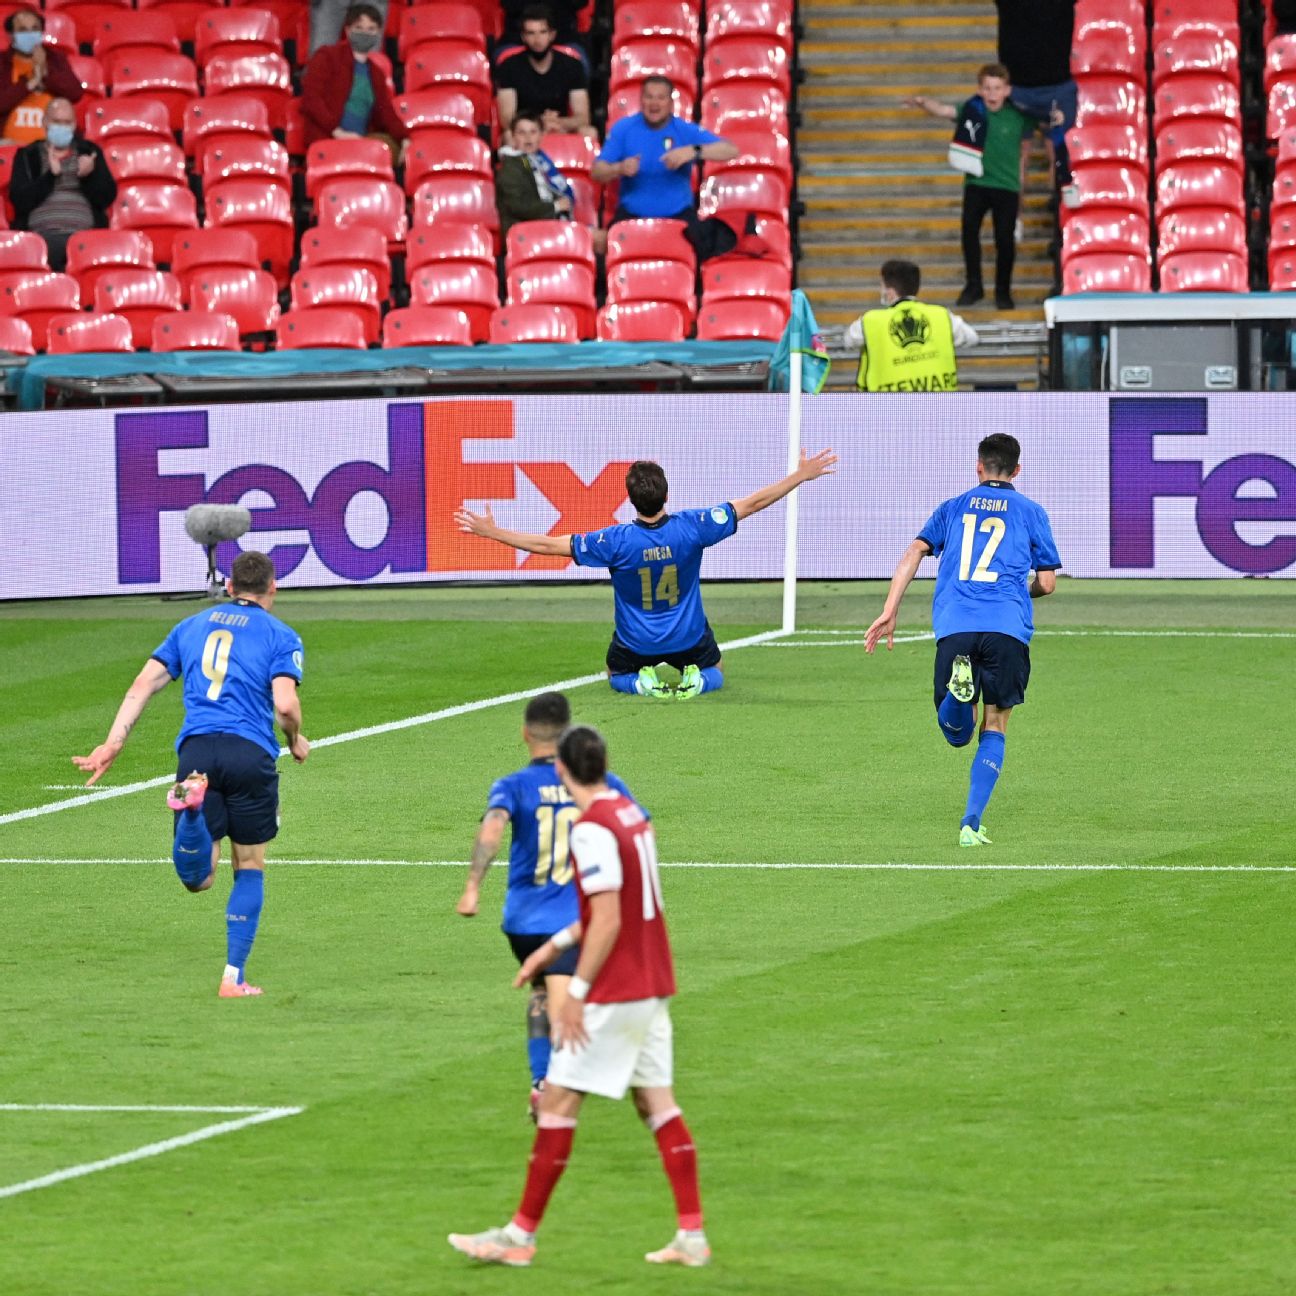 Italy 2 - Austria 1: Initial reaction and random observations